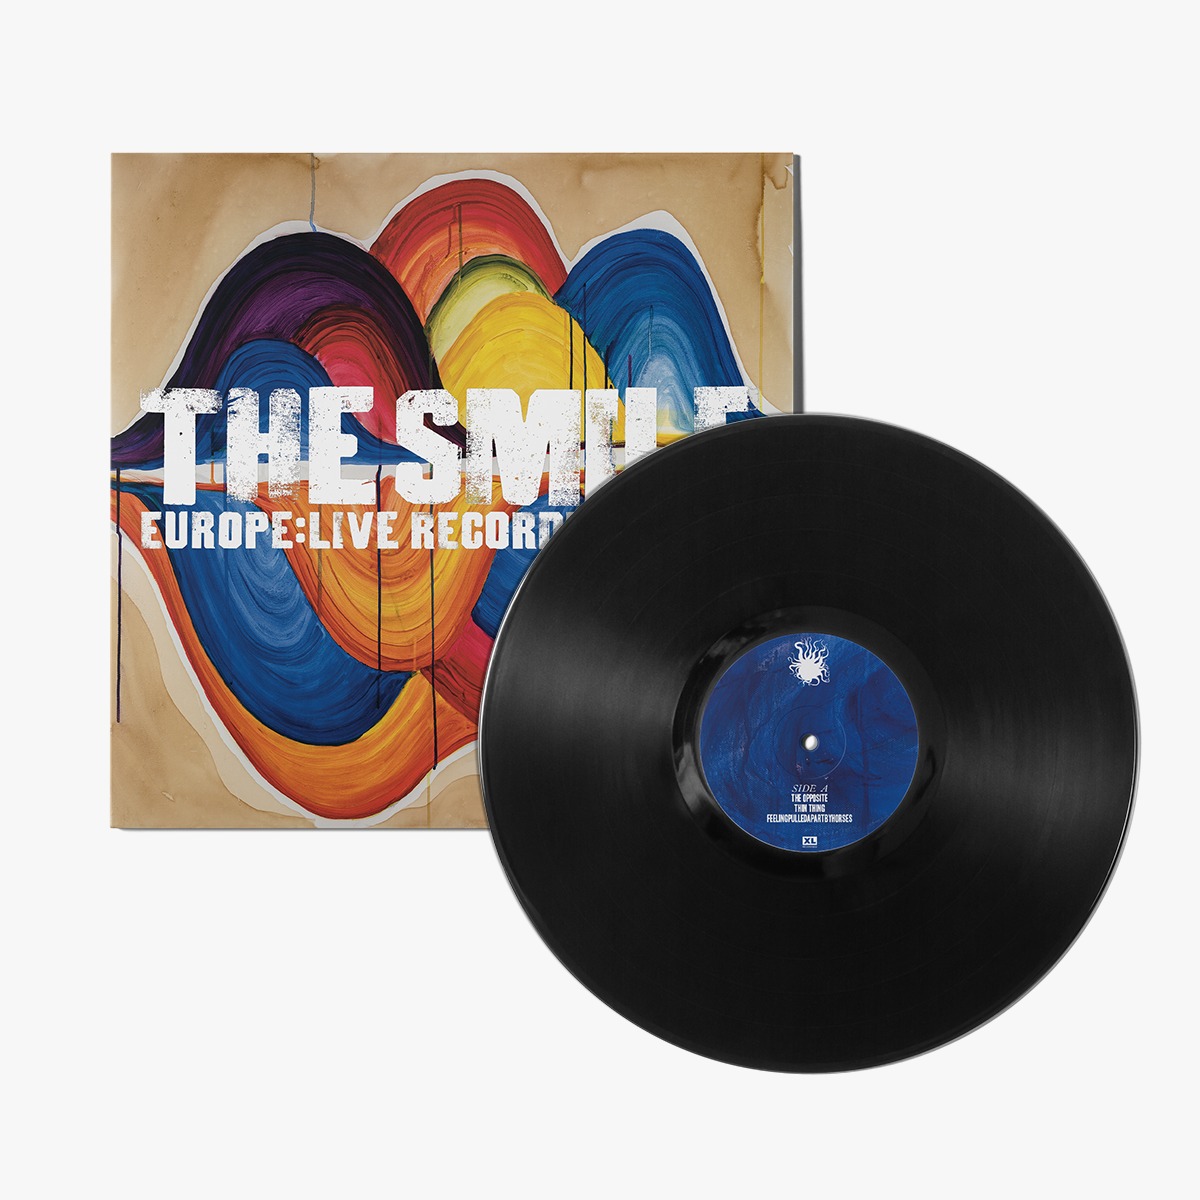 The Smile on Twitter: "We have a new release: EUROPE: LIVE RECORDINGS 2022. It is a vinyl-only limited edition EP and will be out on 10th March across record stores from